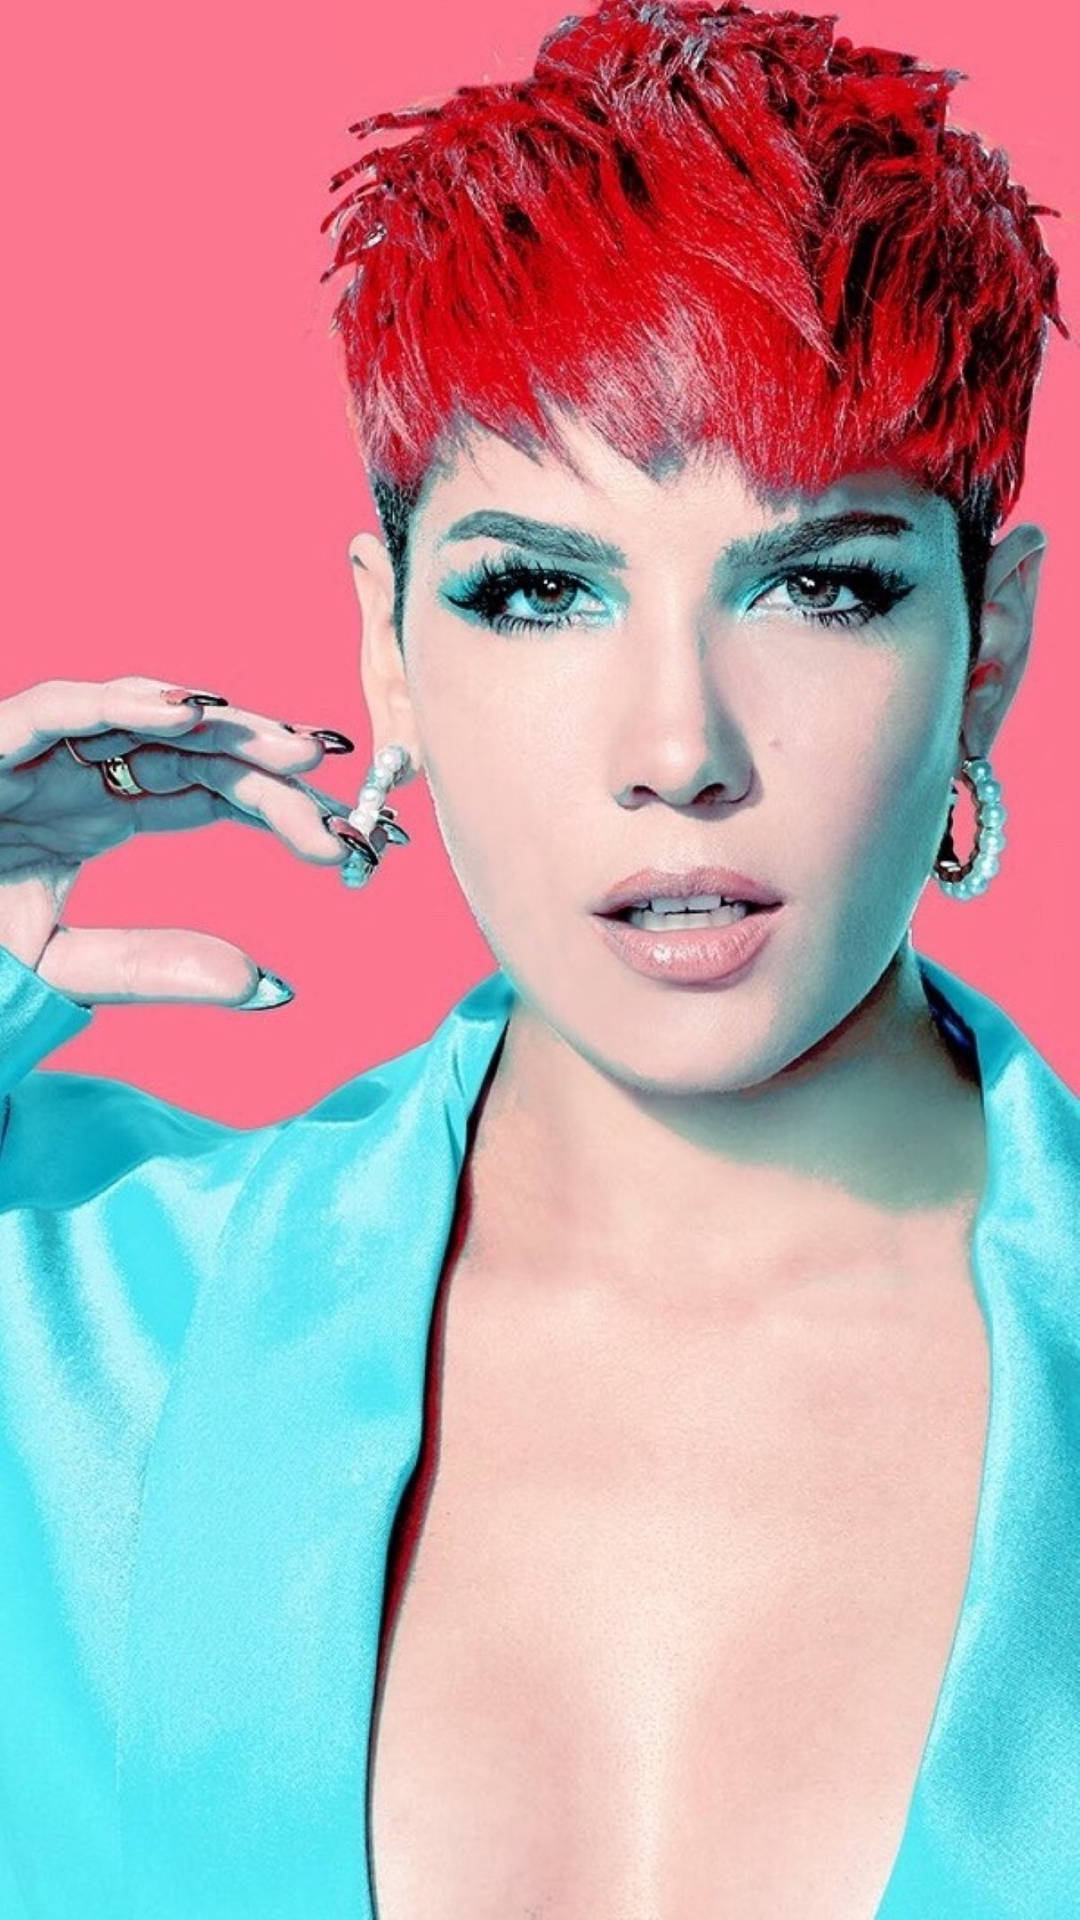 Red-haired Halsey